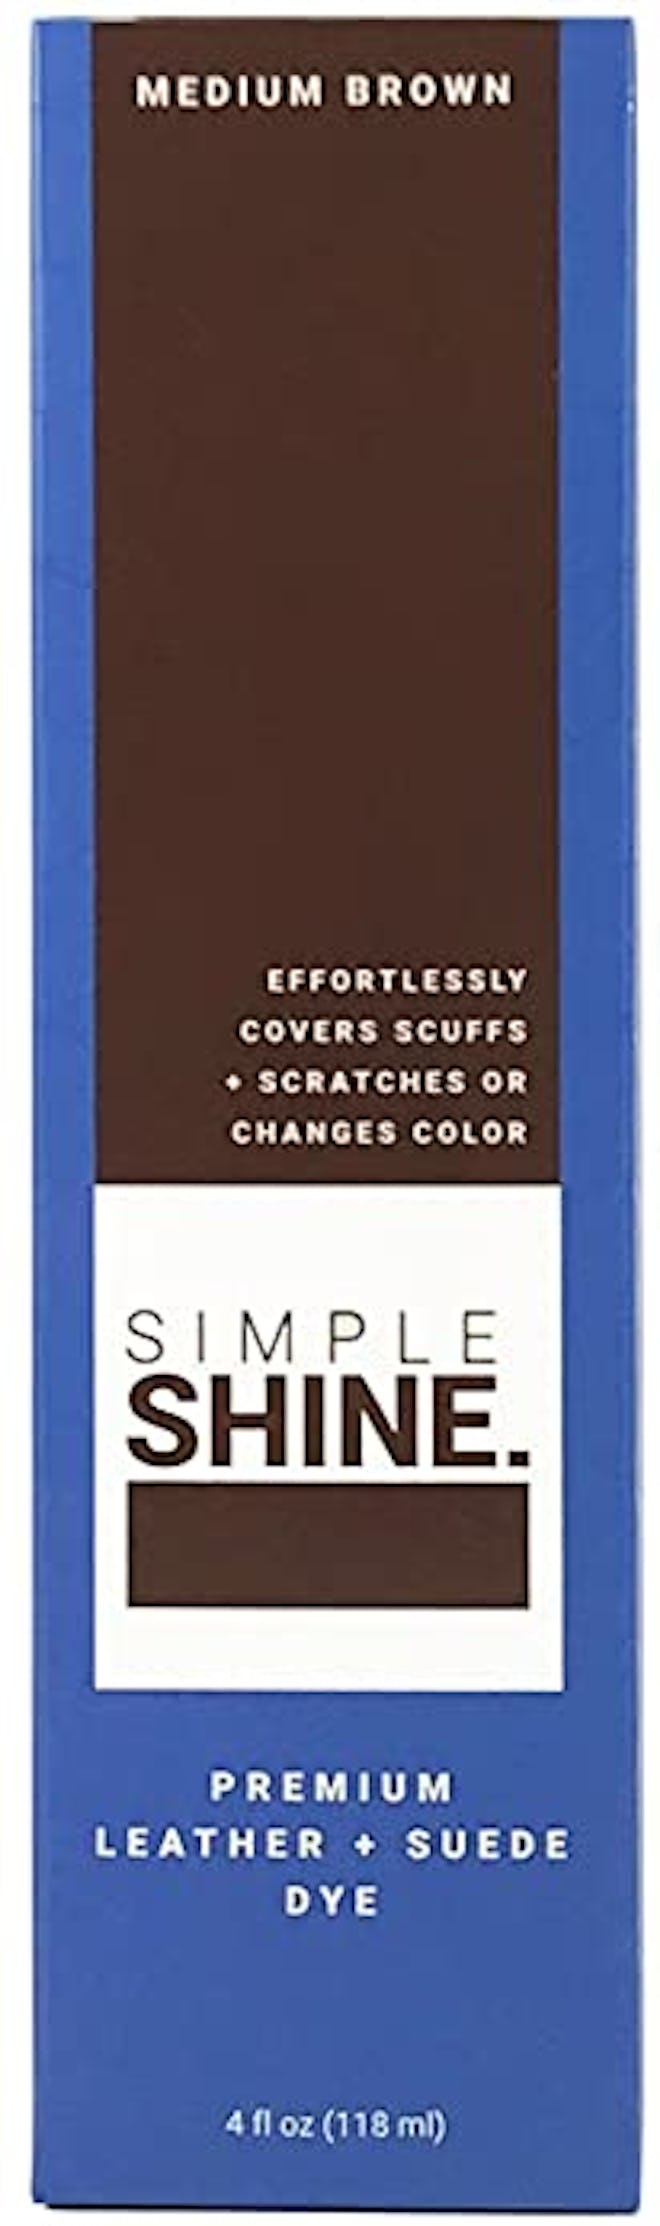 Simpe Shine Premium Suede and Leather Dye